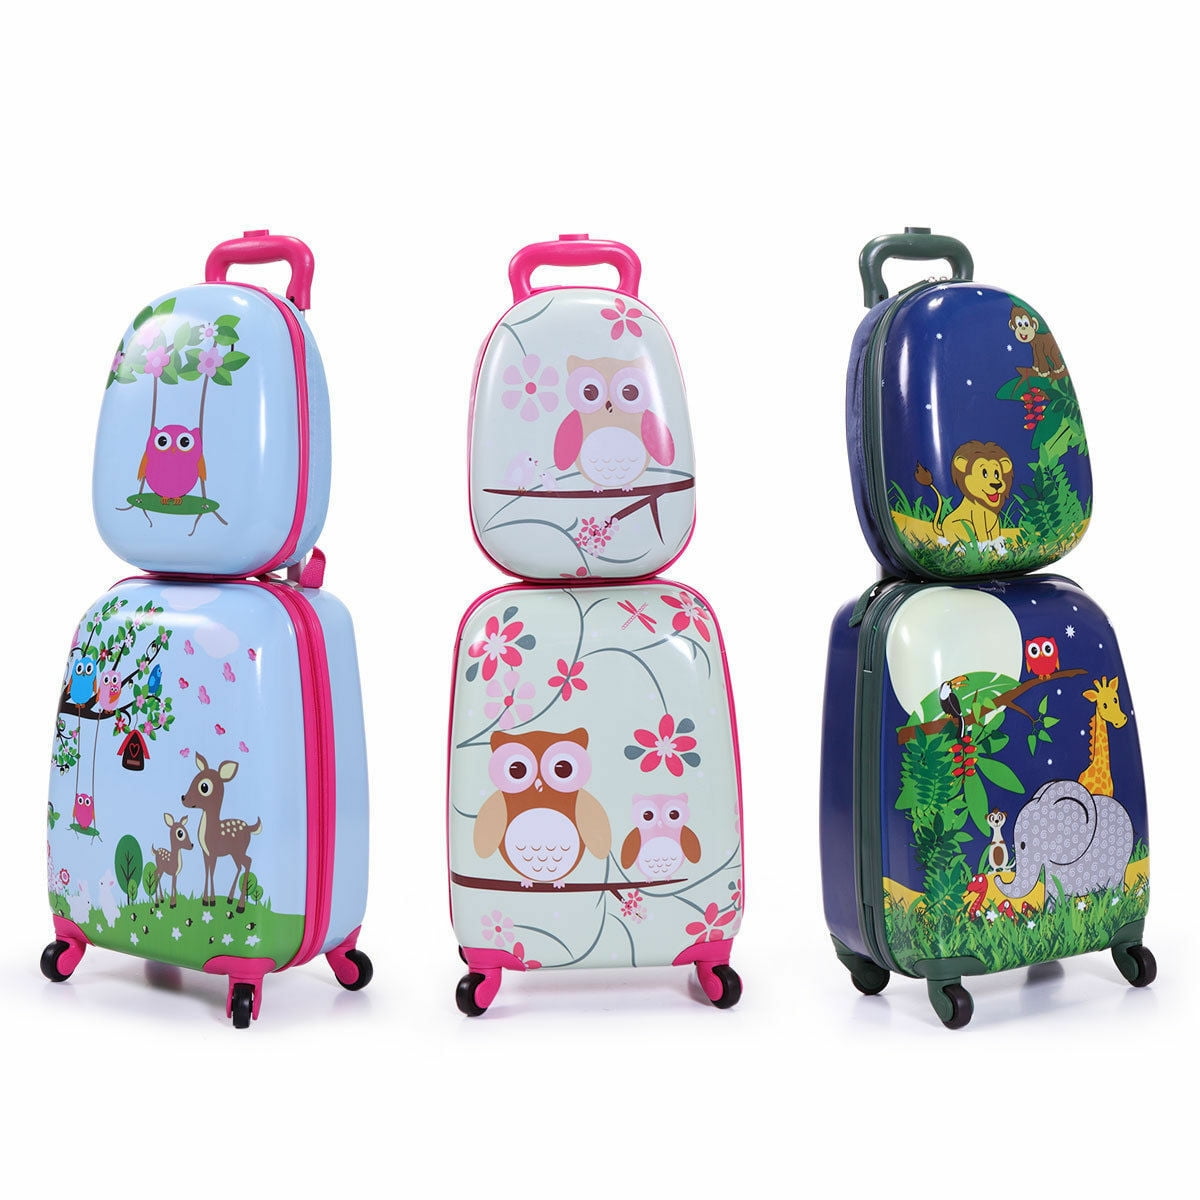 Children Scooter Suitcase Wheels Kids Foldable Luggage Travel Carry Case Trolley 